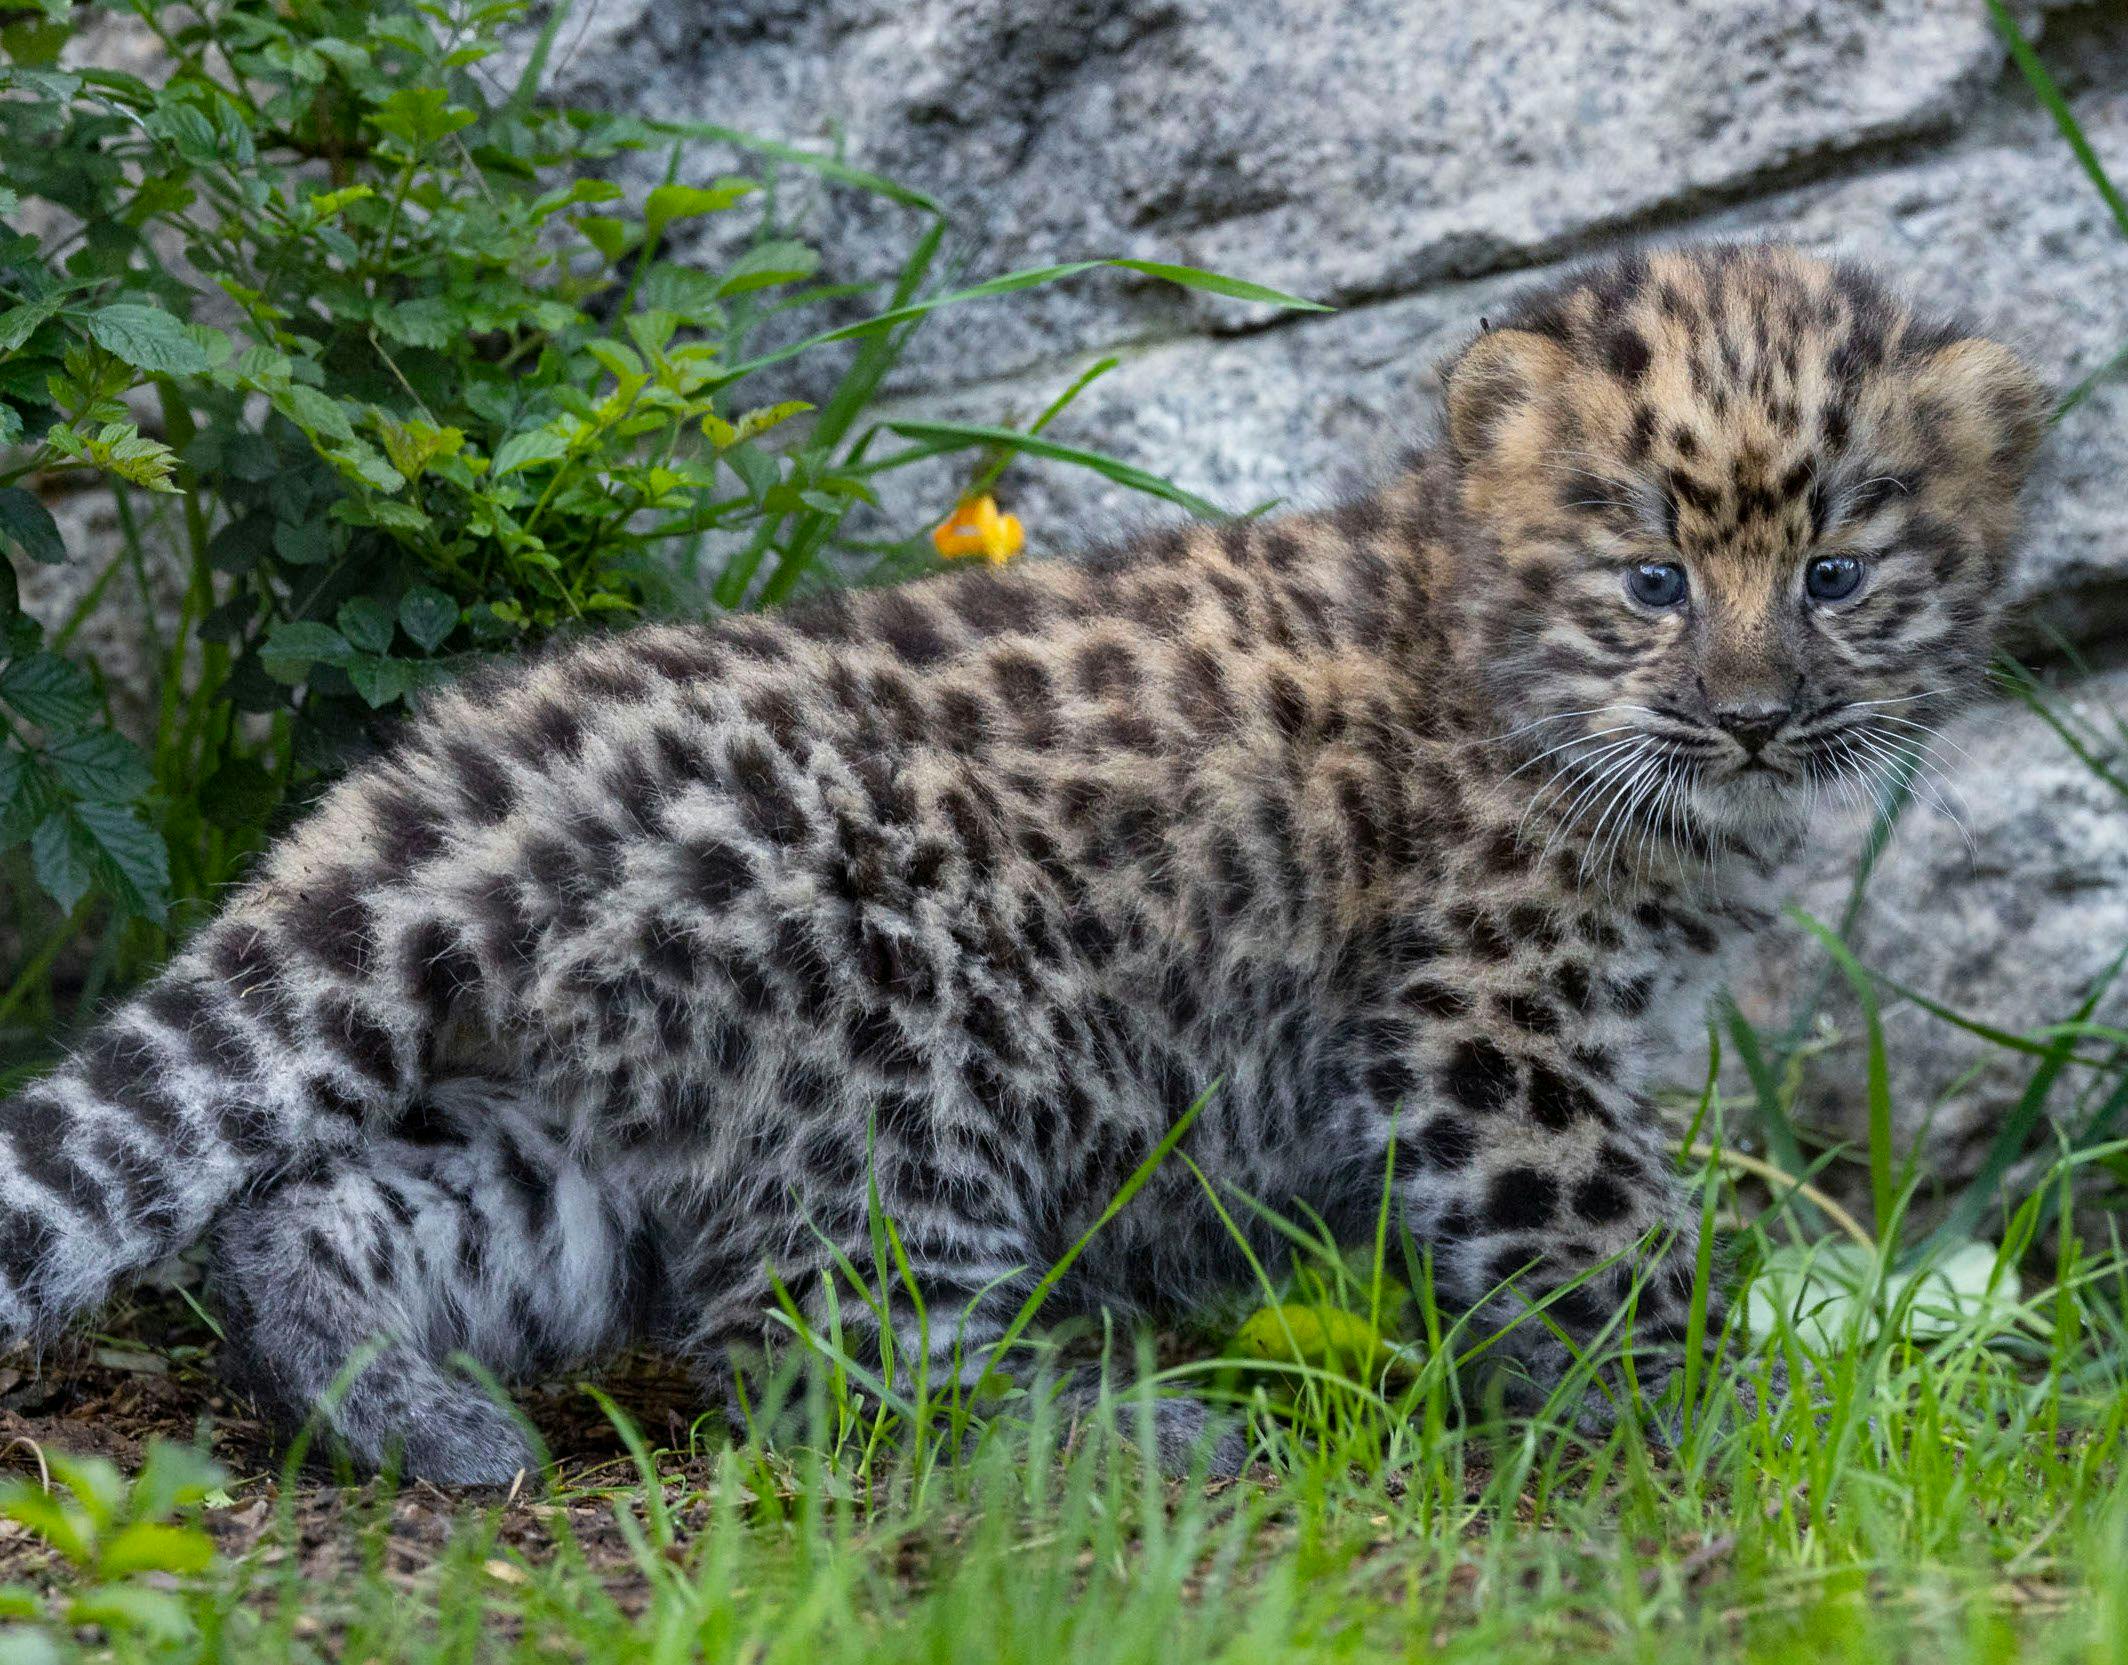 Critically endangered twin Amur leopards born at San Diego Zoo 